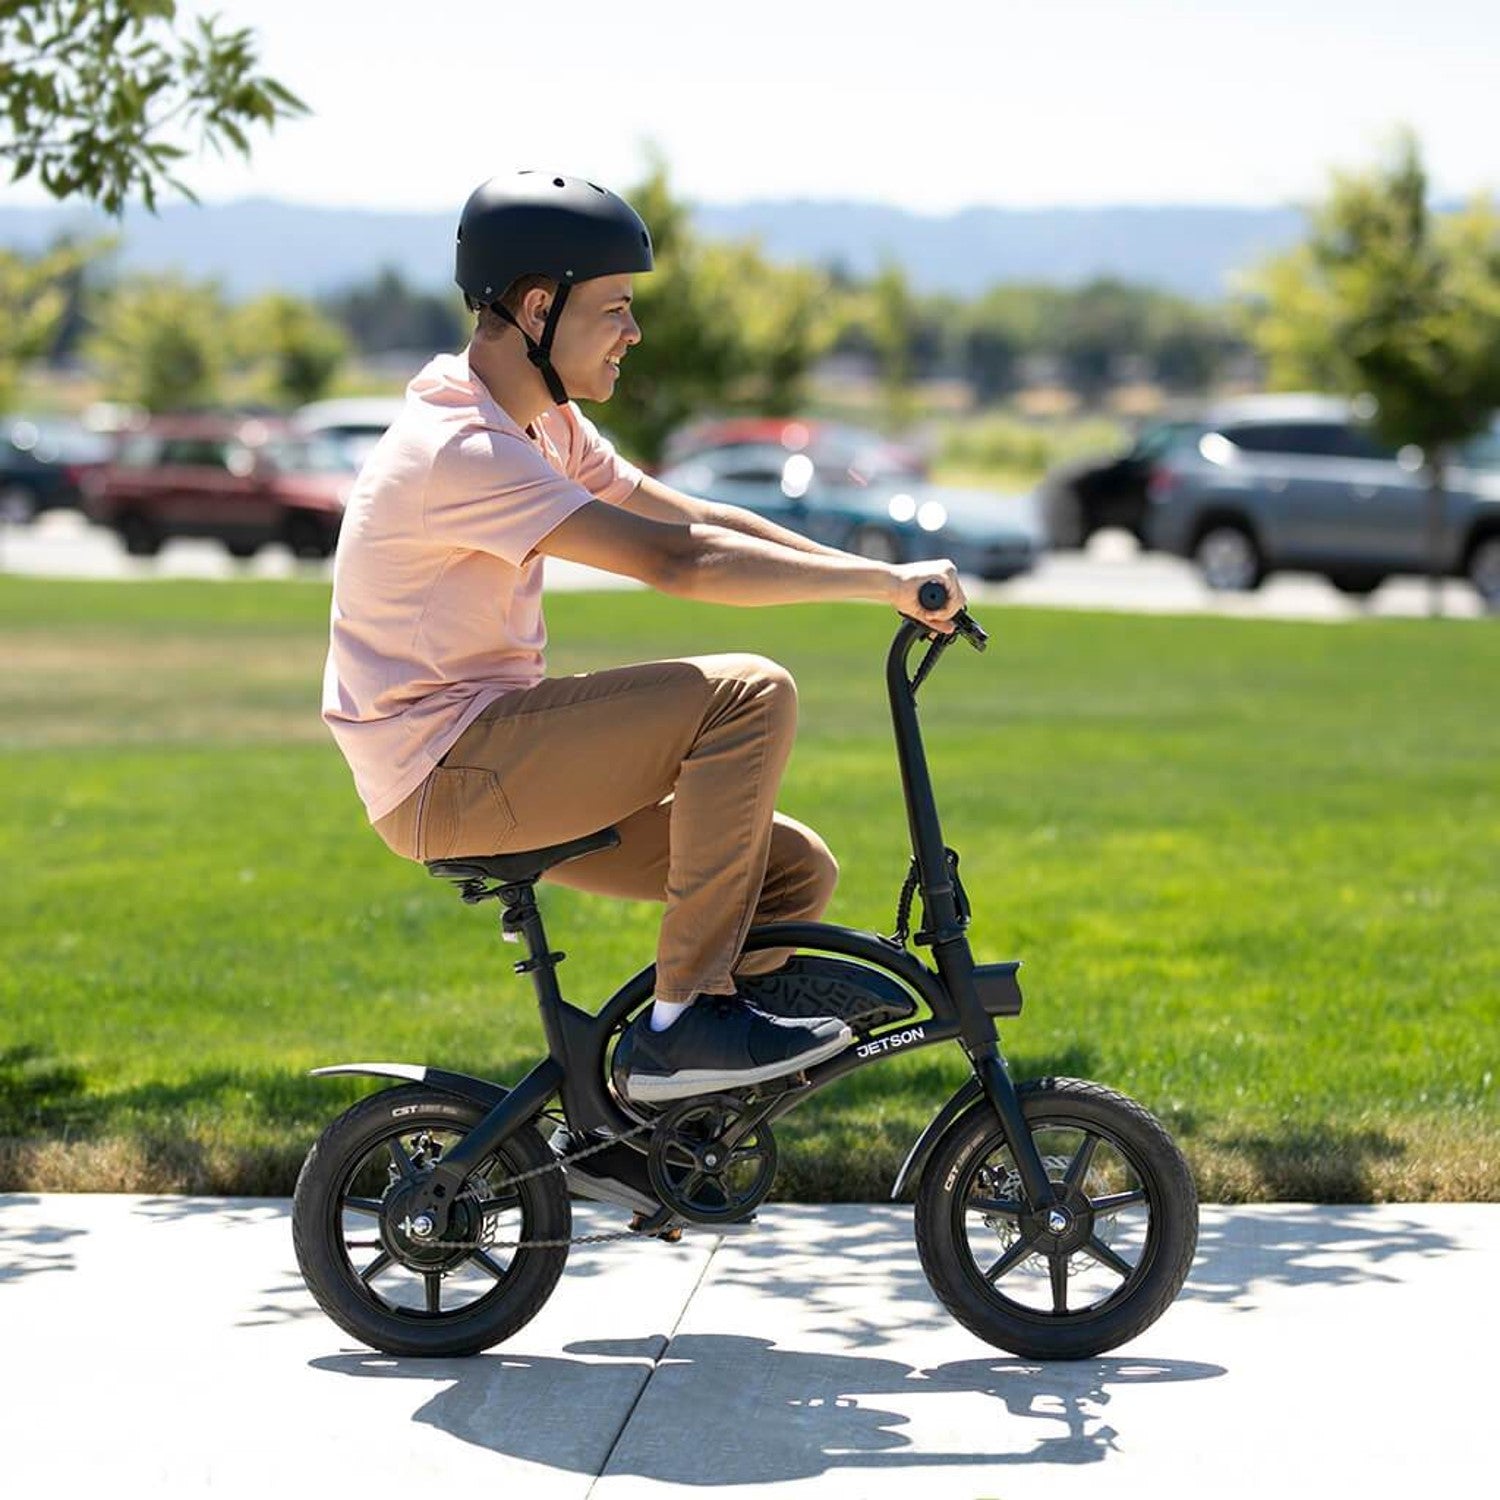 Jetson Bolt Pro Folding Electric Bike with LED display, headlight and